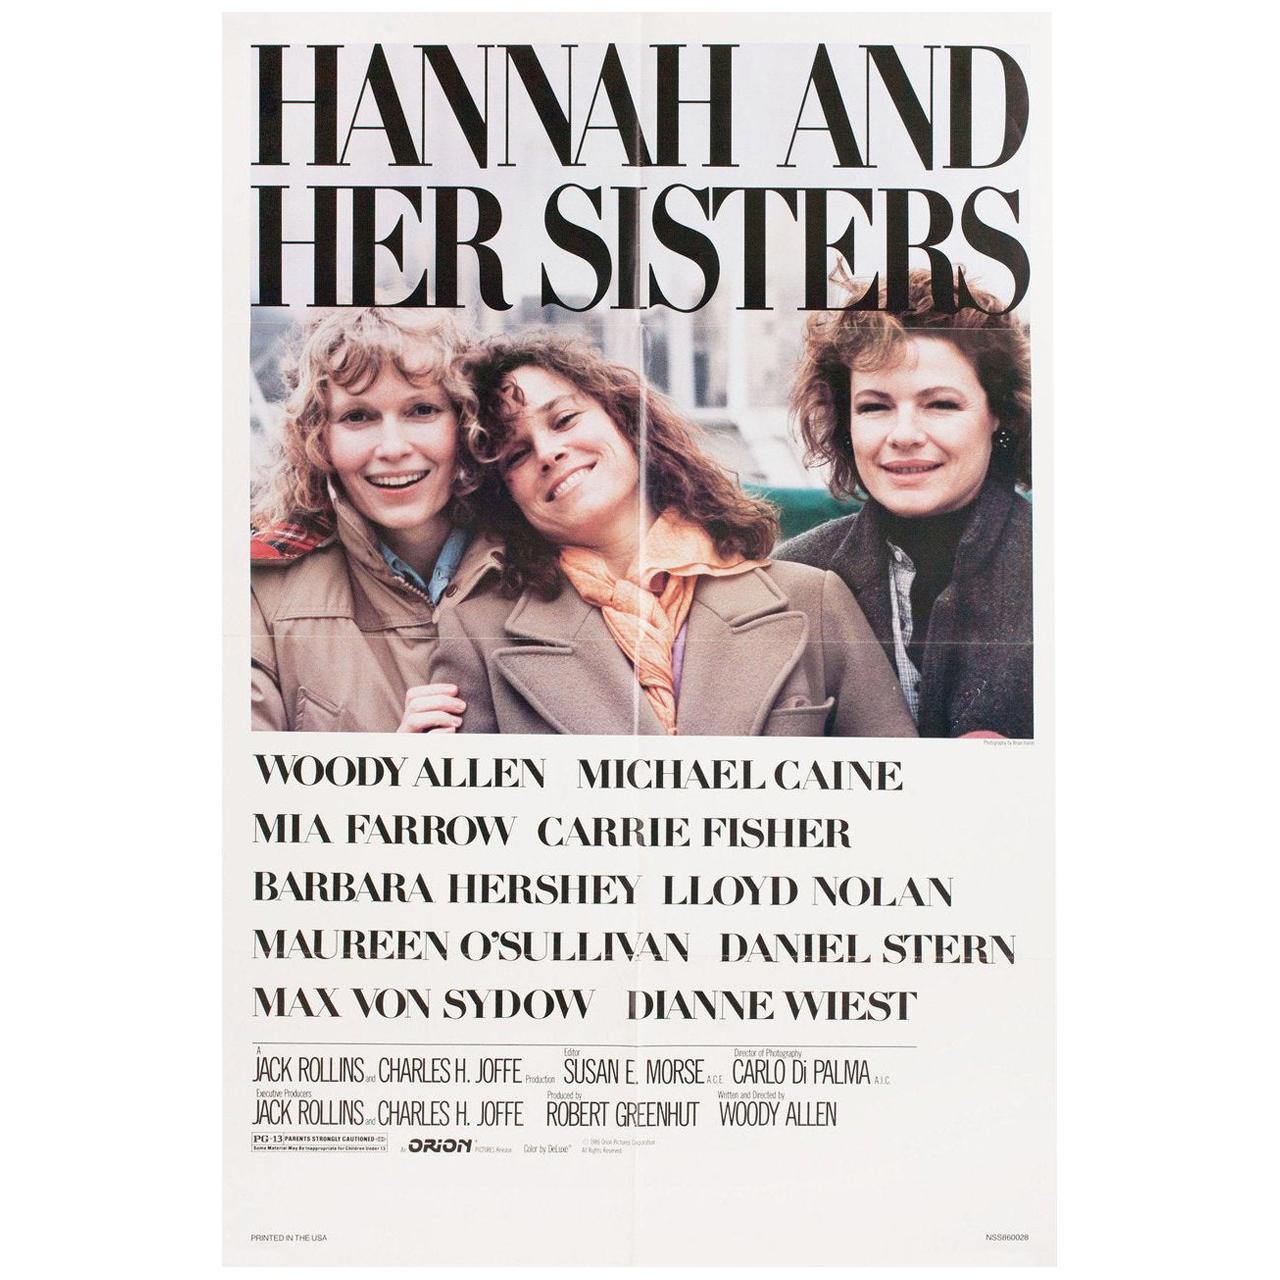 "Hannah and Her Sisters" 1986 U.S. One Sheet Film Poster